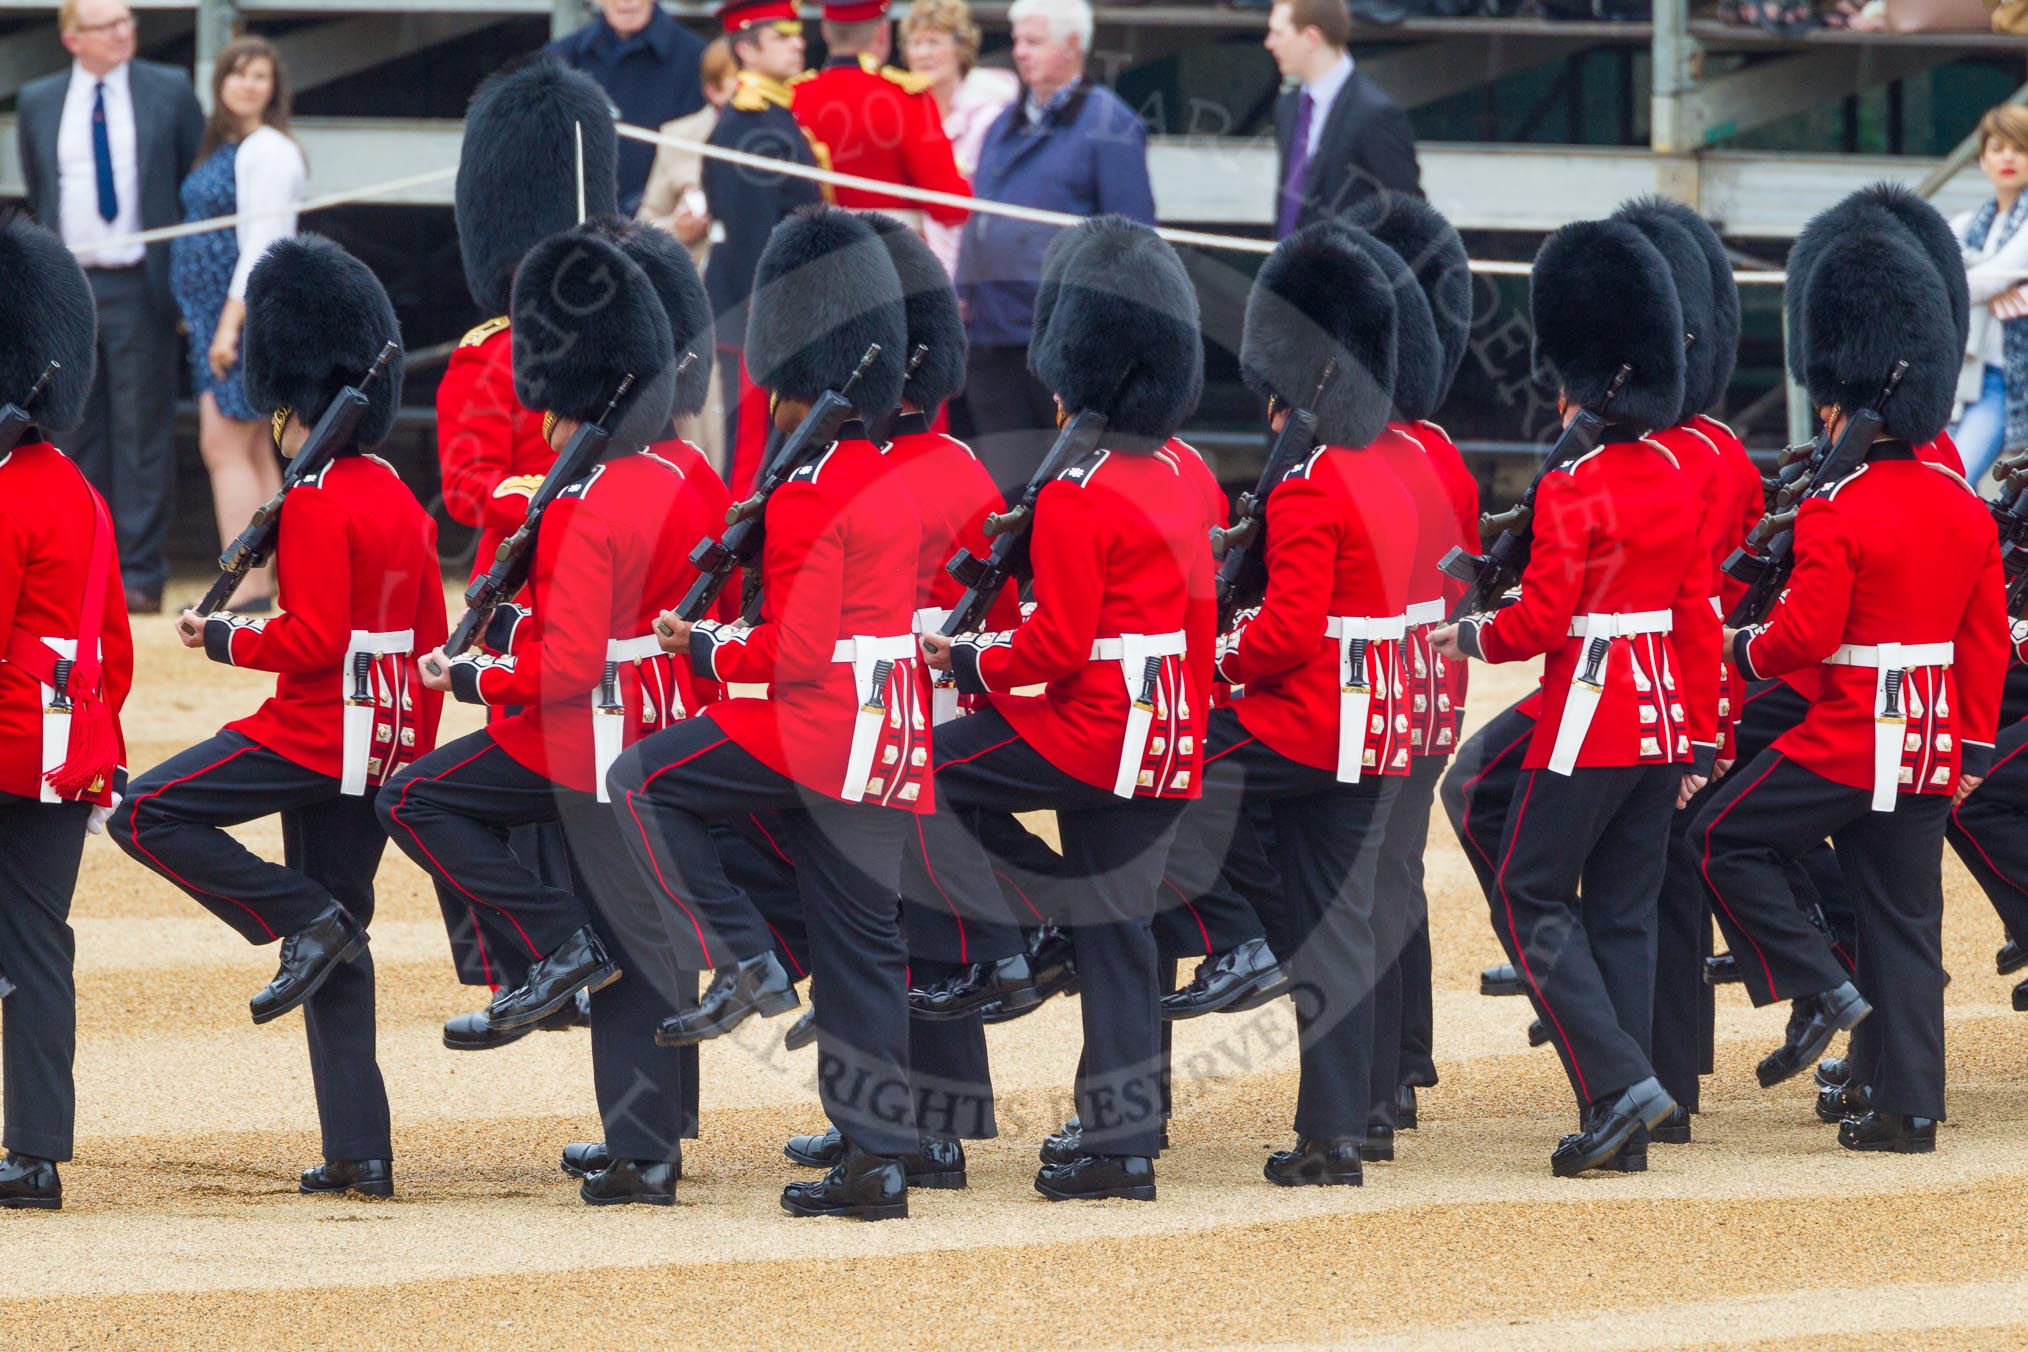 The Colonel's Review 2016.
Horse Guards Parade, Westminster,
London,

United Kingdom,
on 04 June 2016 at 10:26, image #65